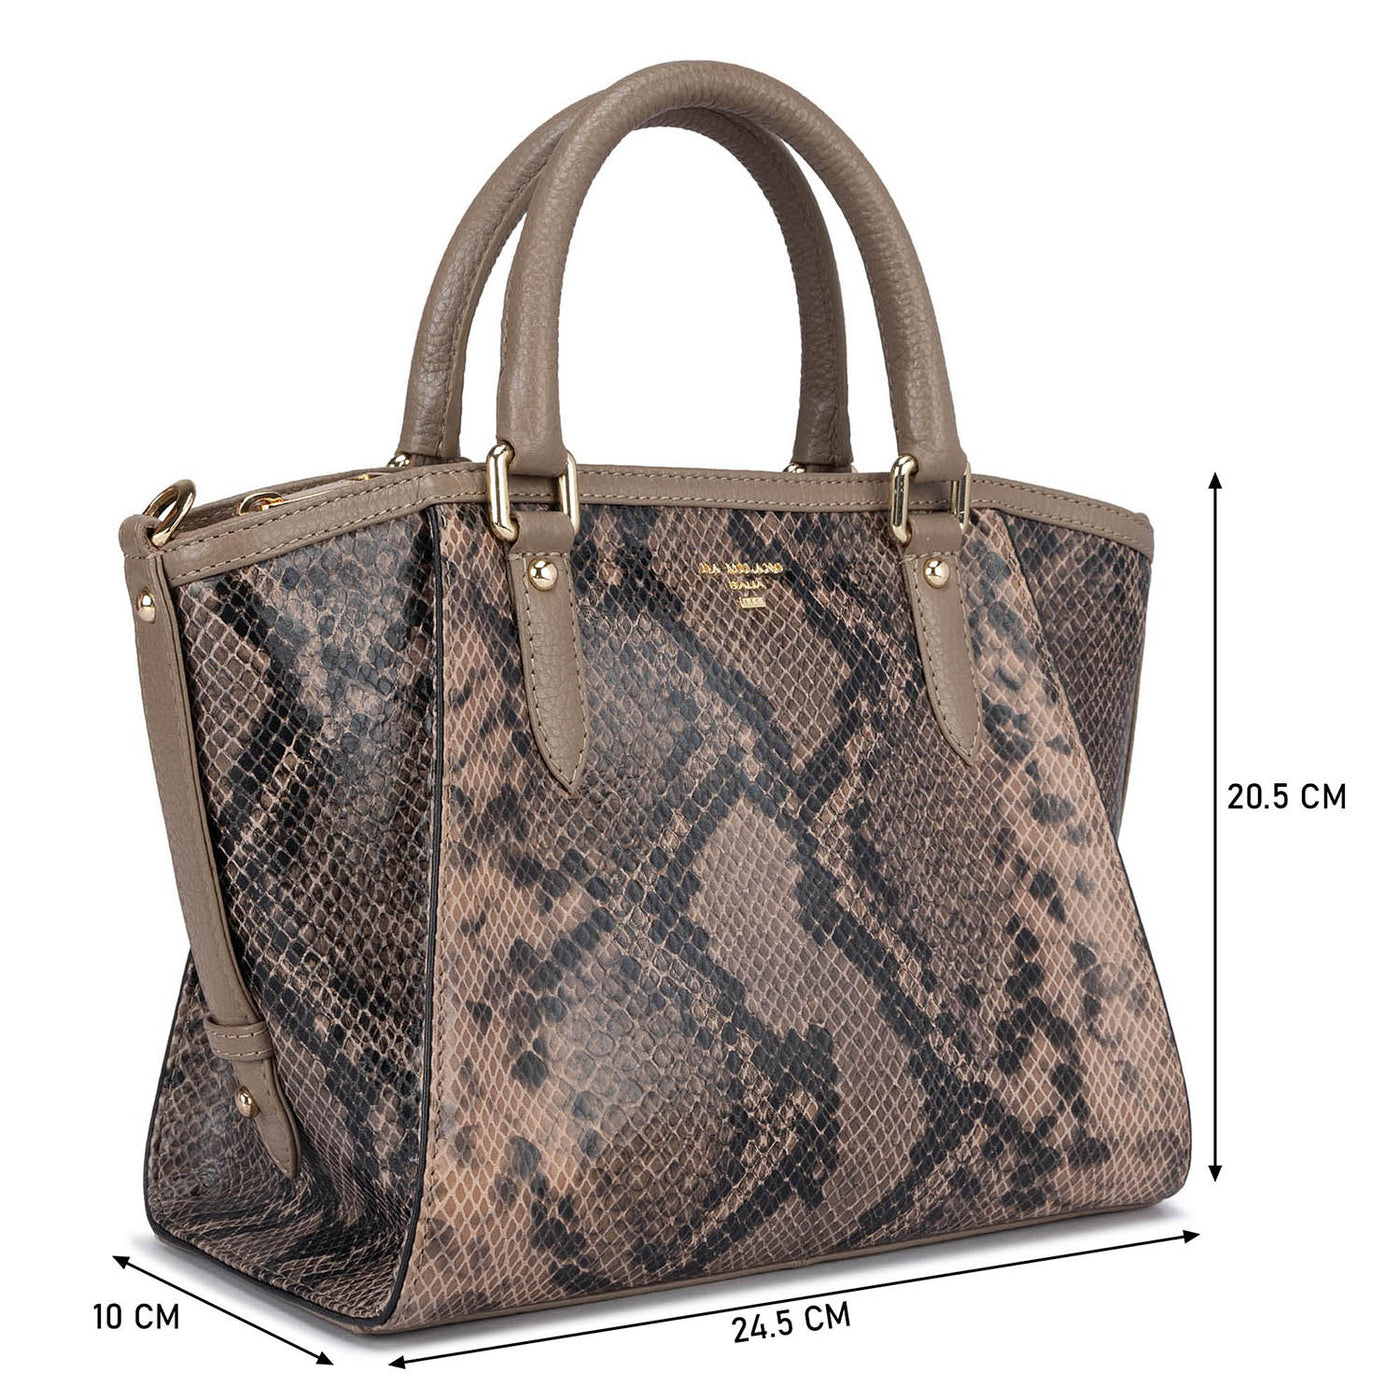 Small Snake Leather Satchel - Taupe